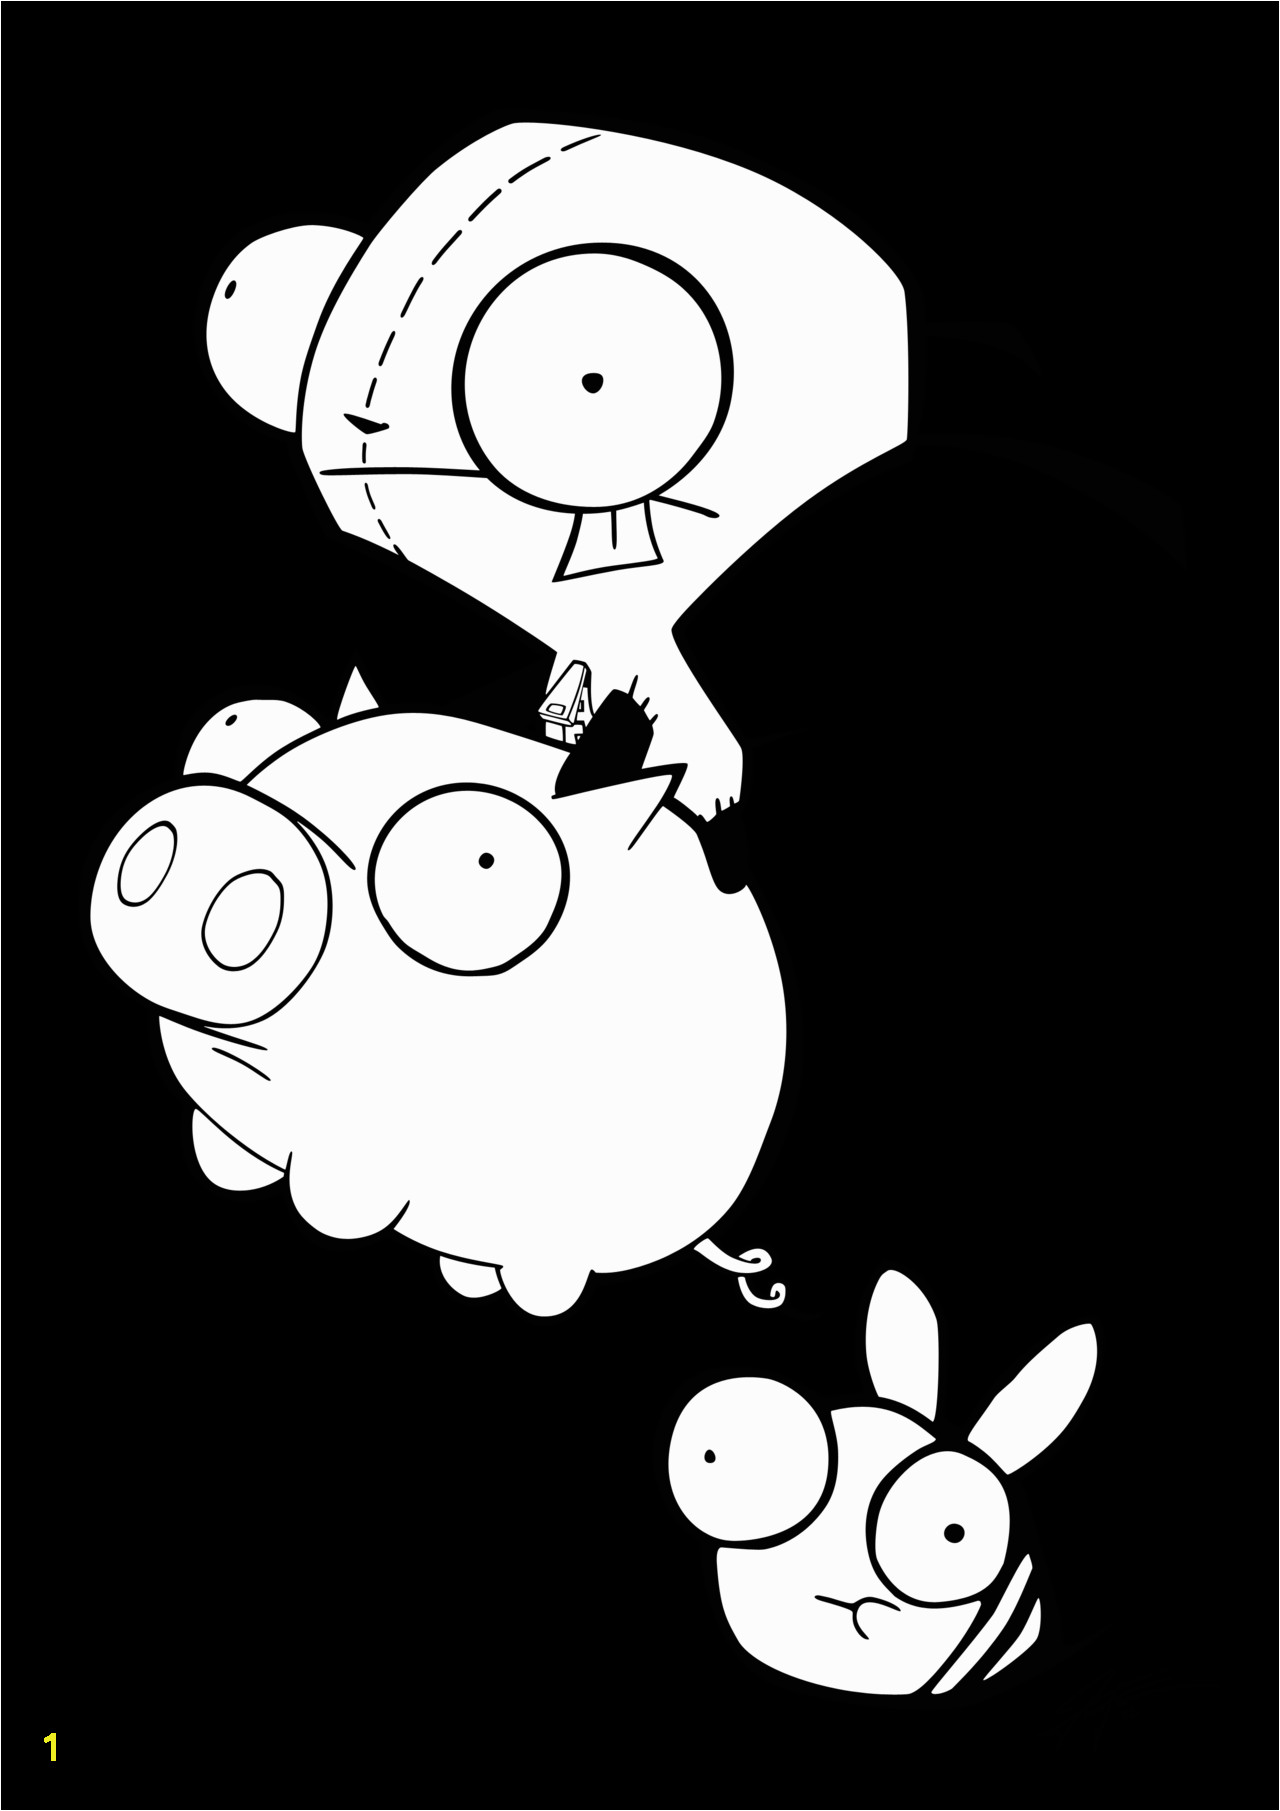 Gir Coloring Pages From Invader Zim Gir and Piggy Coloring Pages Coloring Pages Coloring Pages